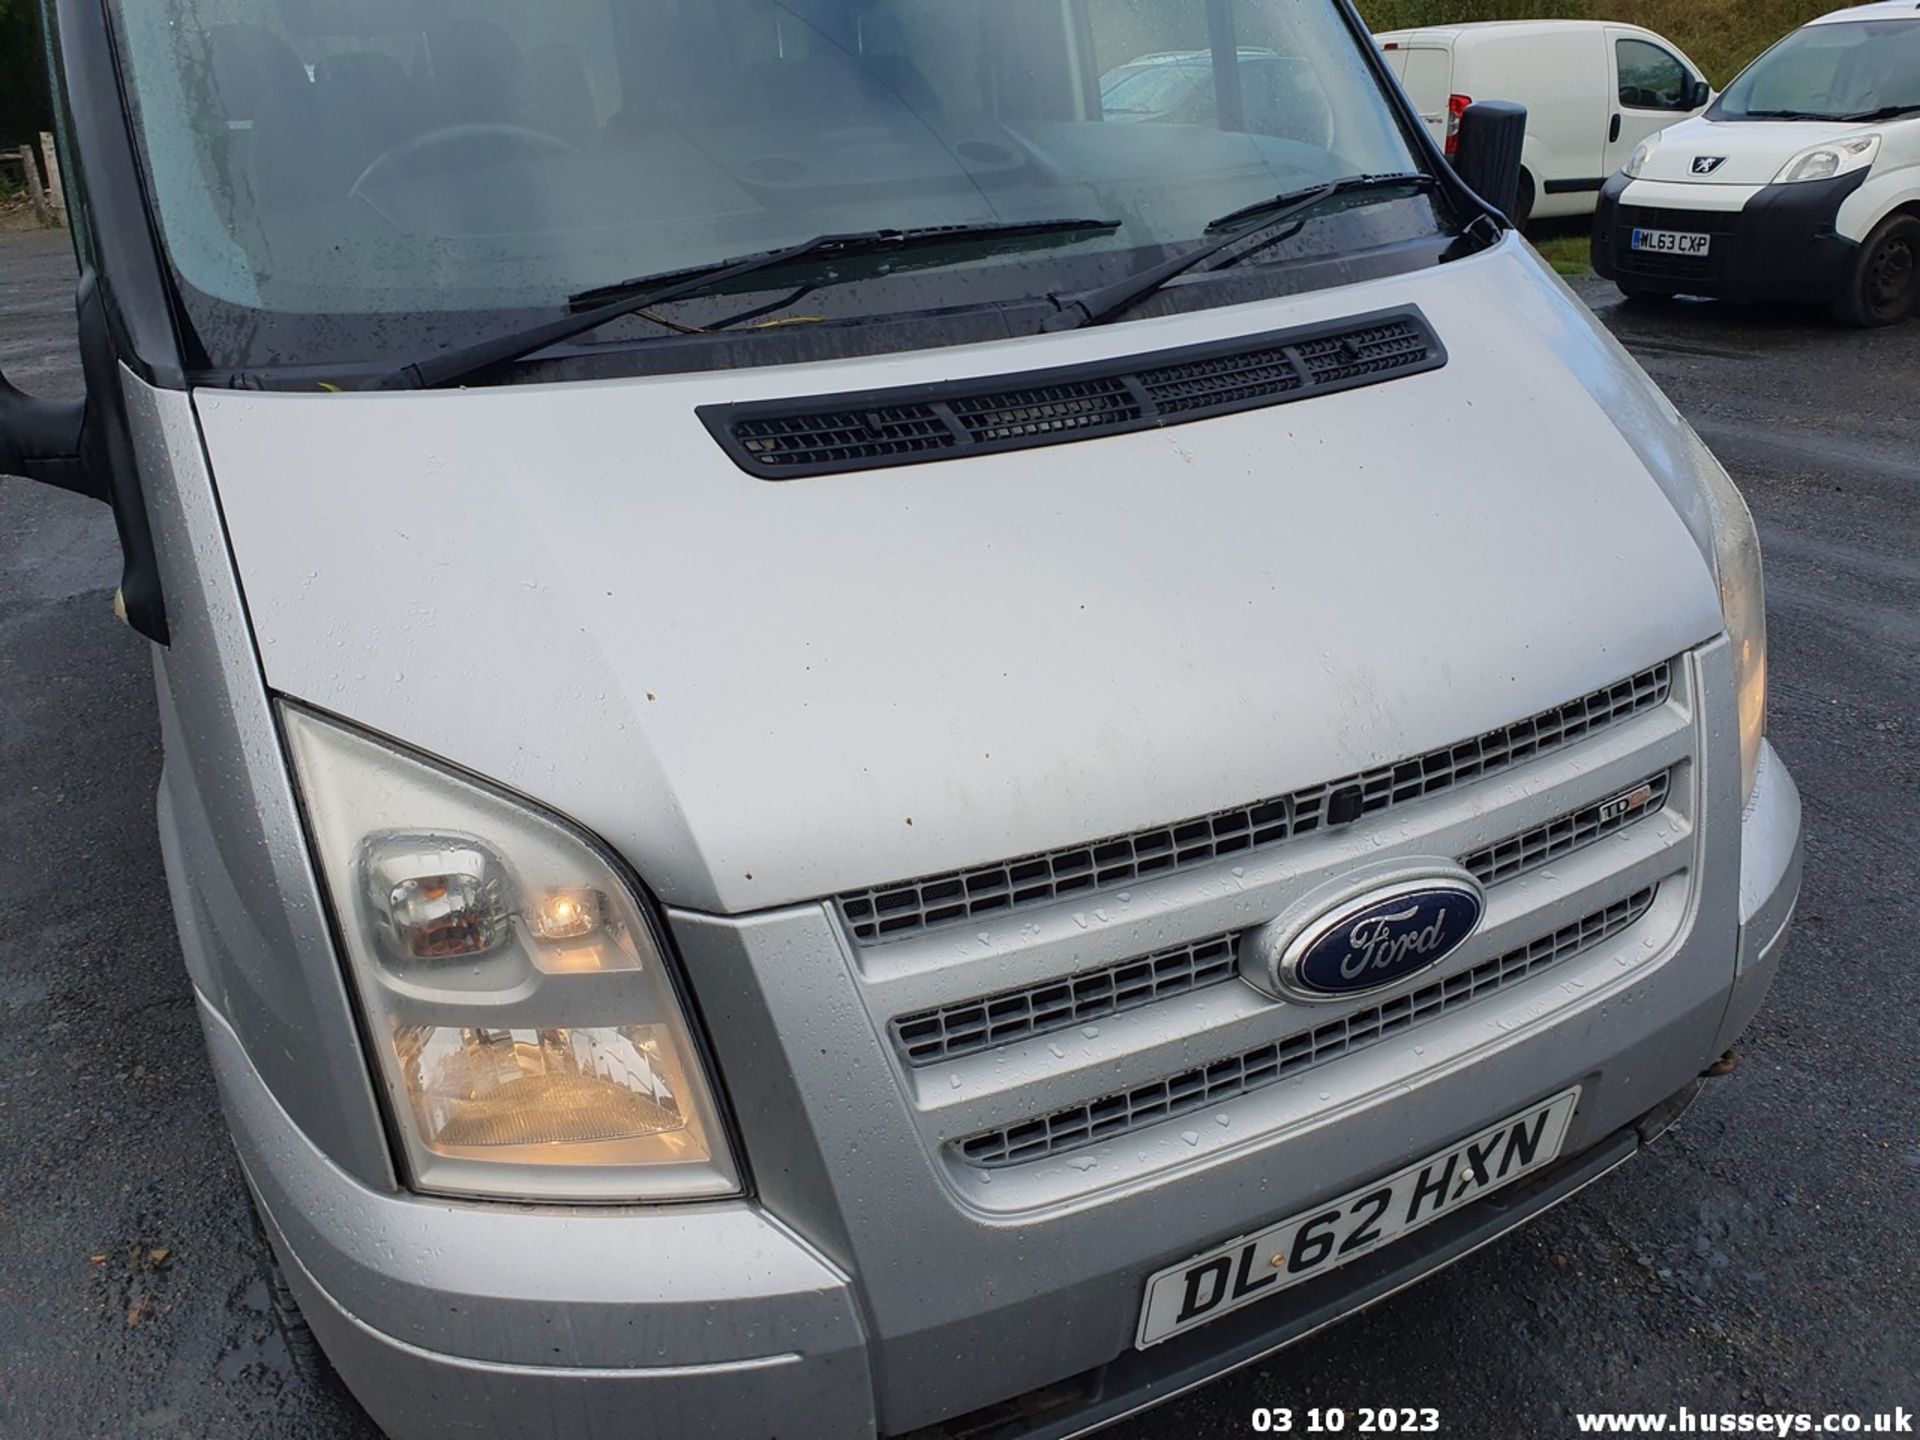 13/62 FORD TRANSIT 125 T280 FWD - 2198cc 5dr MPV (Silver, 146k) - Image 28 of 65